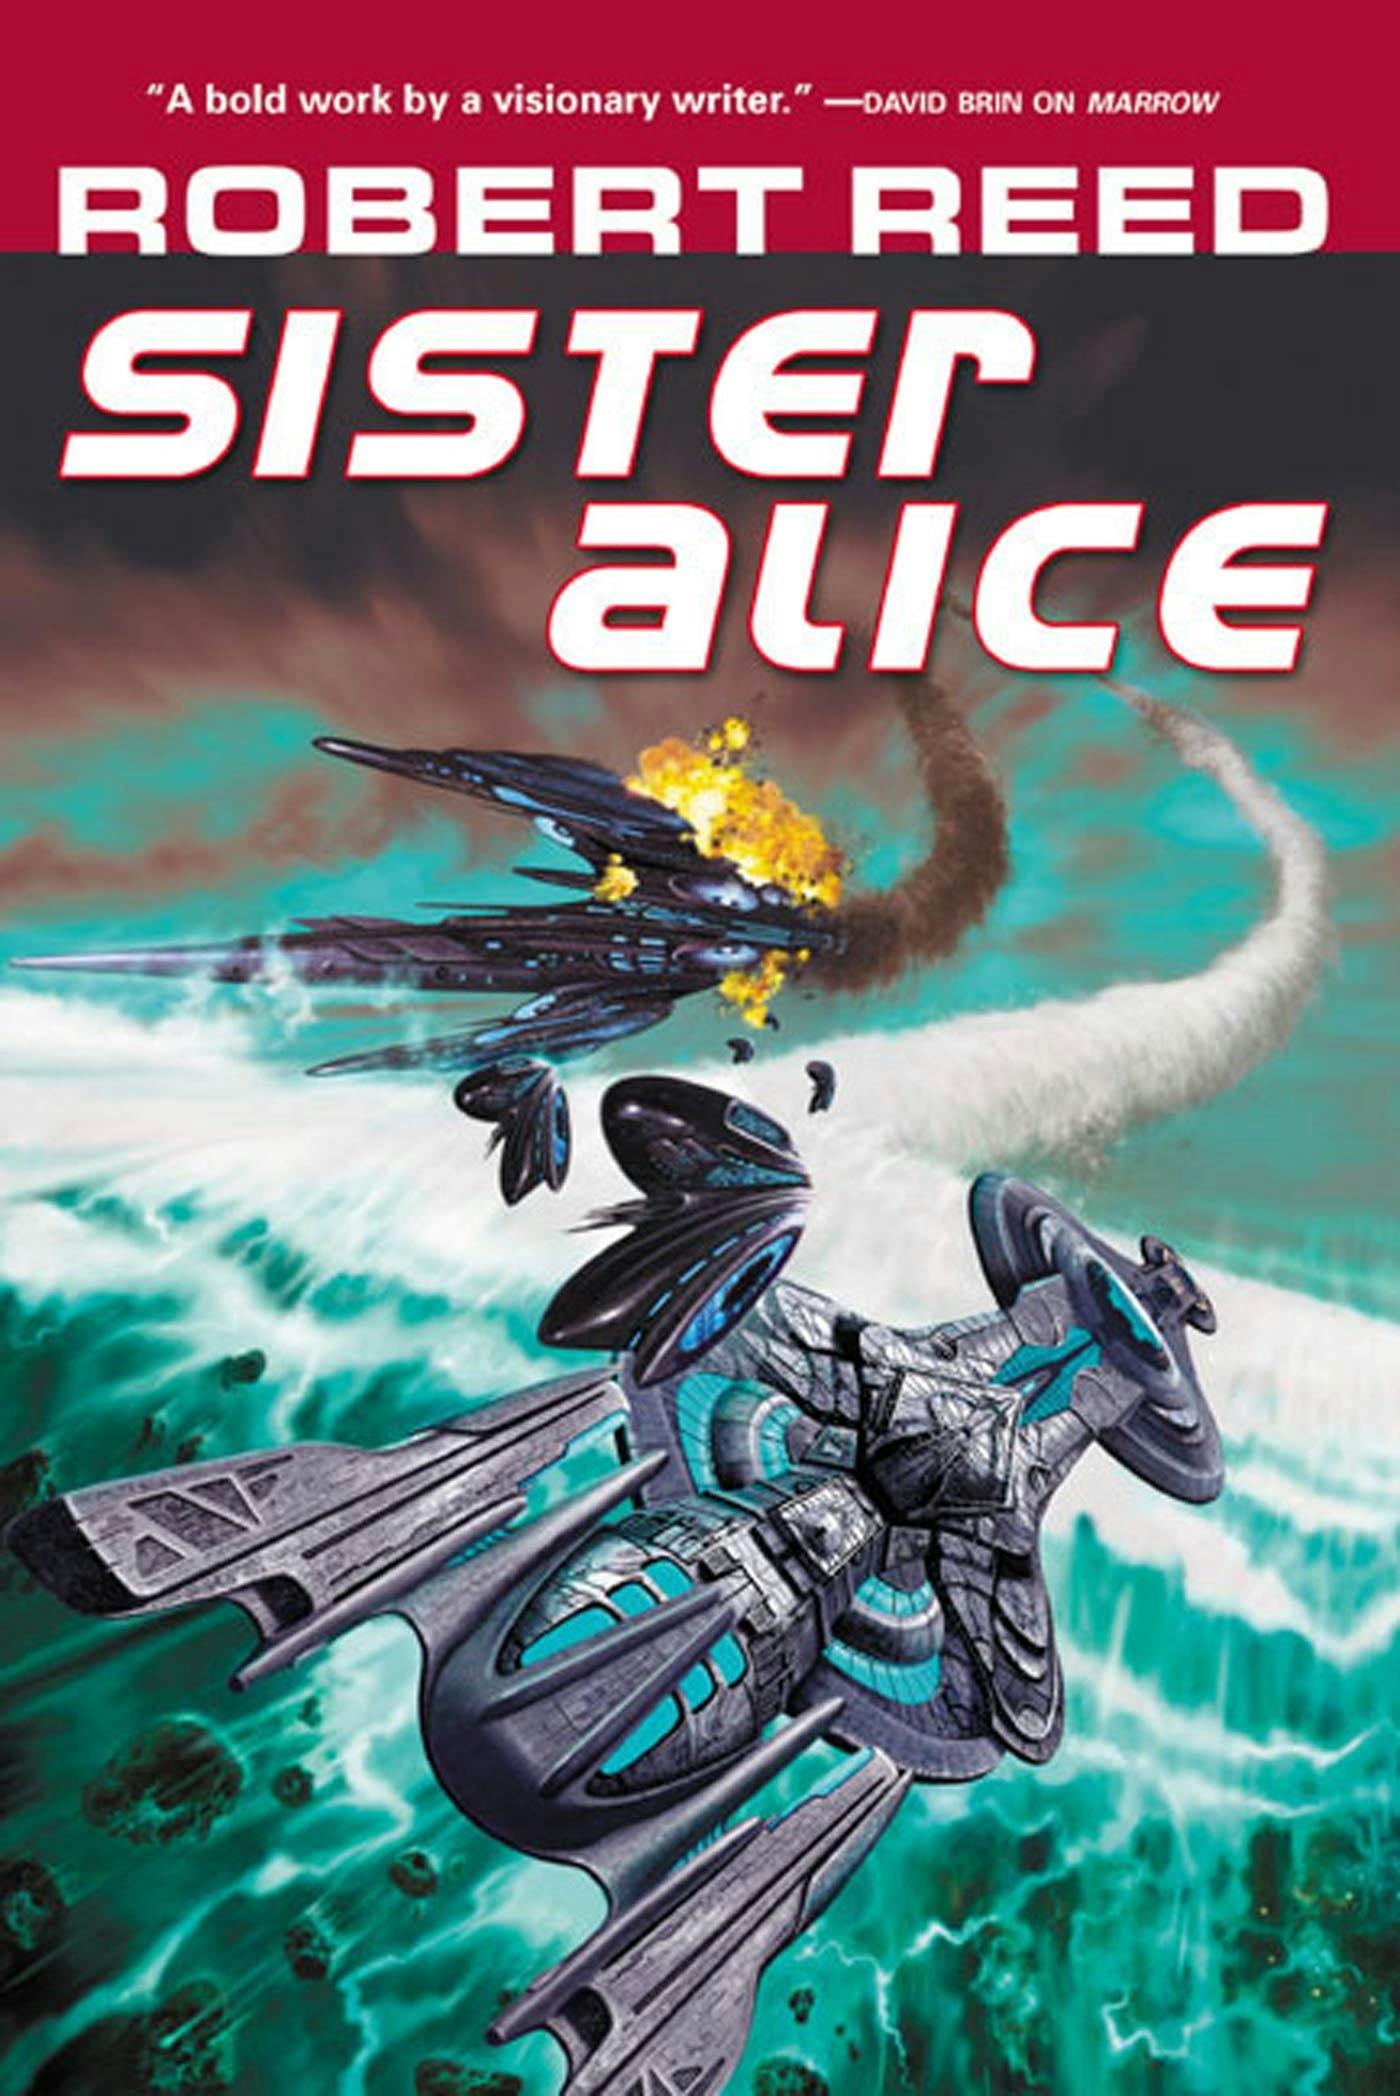 Cover for the book titled as: Sister Alice